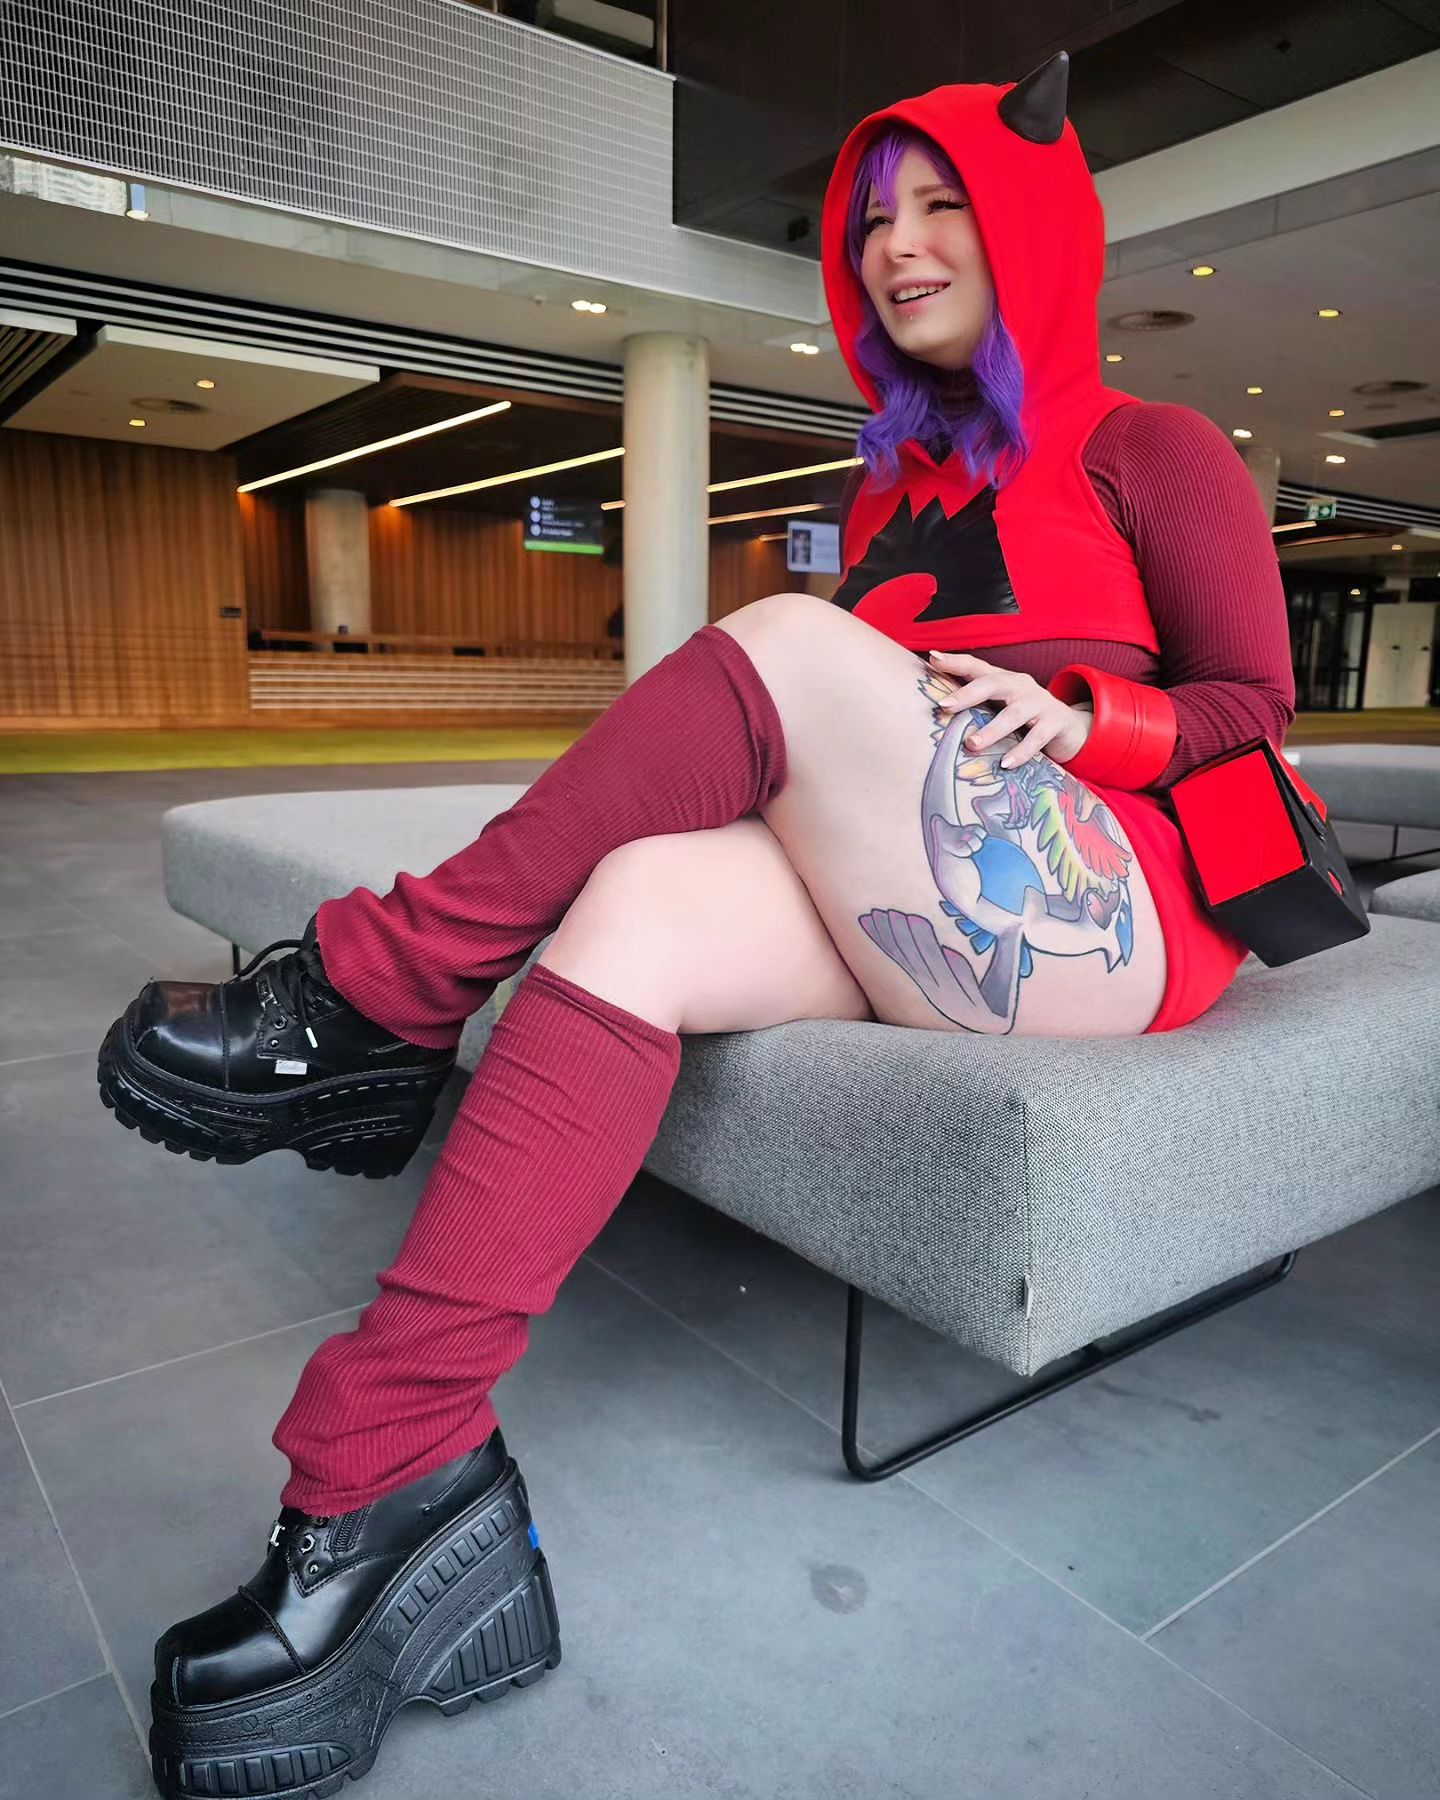 I had a very Pokémon weekend at @generationgamesaus
Magma Grunt is my comfiest cosplay, I feel like such a gremlin in it 🤣
And I don't remember what @fifty_face_jayce said while he was taking these photos but it was funny apparently 🤣
.
.
#teammagma #teammagmagrunt #magmagrunt #pokemon #teammagmacosplay #teammagmagruntcosplay #magmagruntcosplay #pokemoncosplay